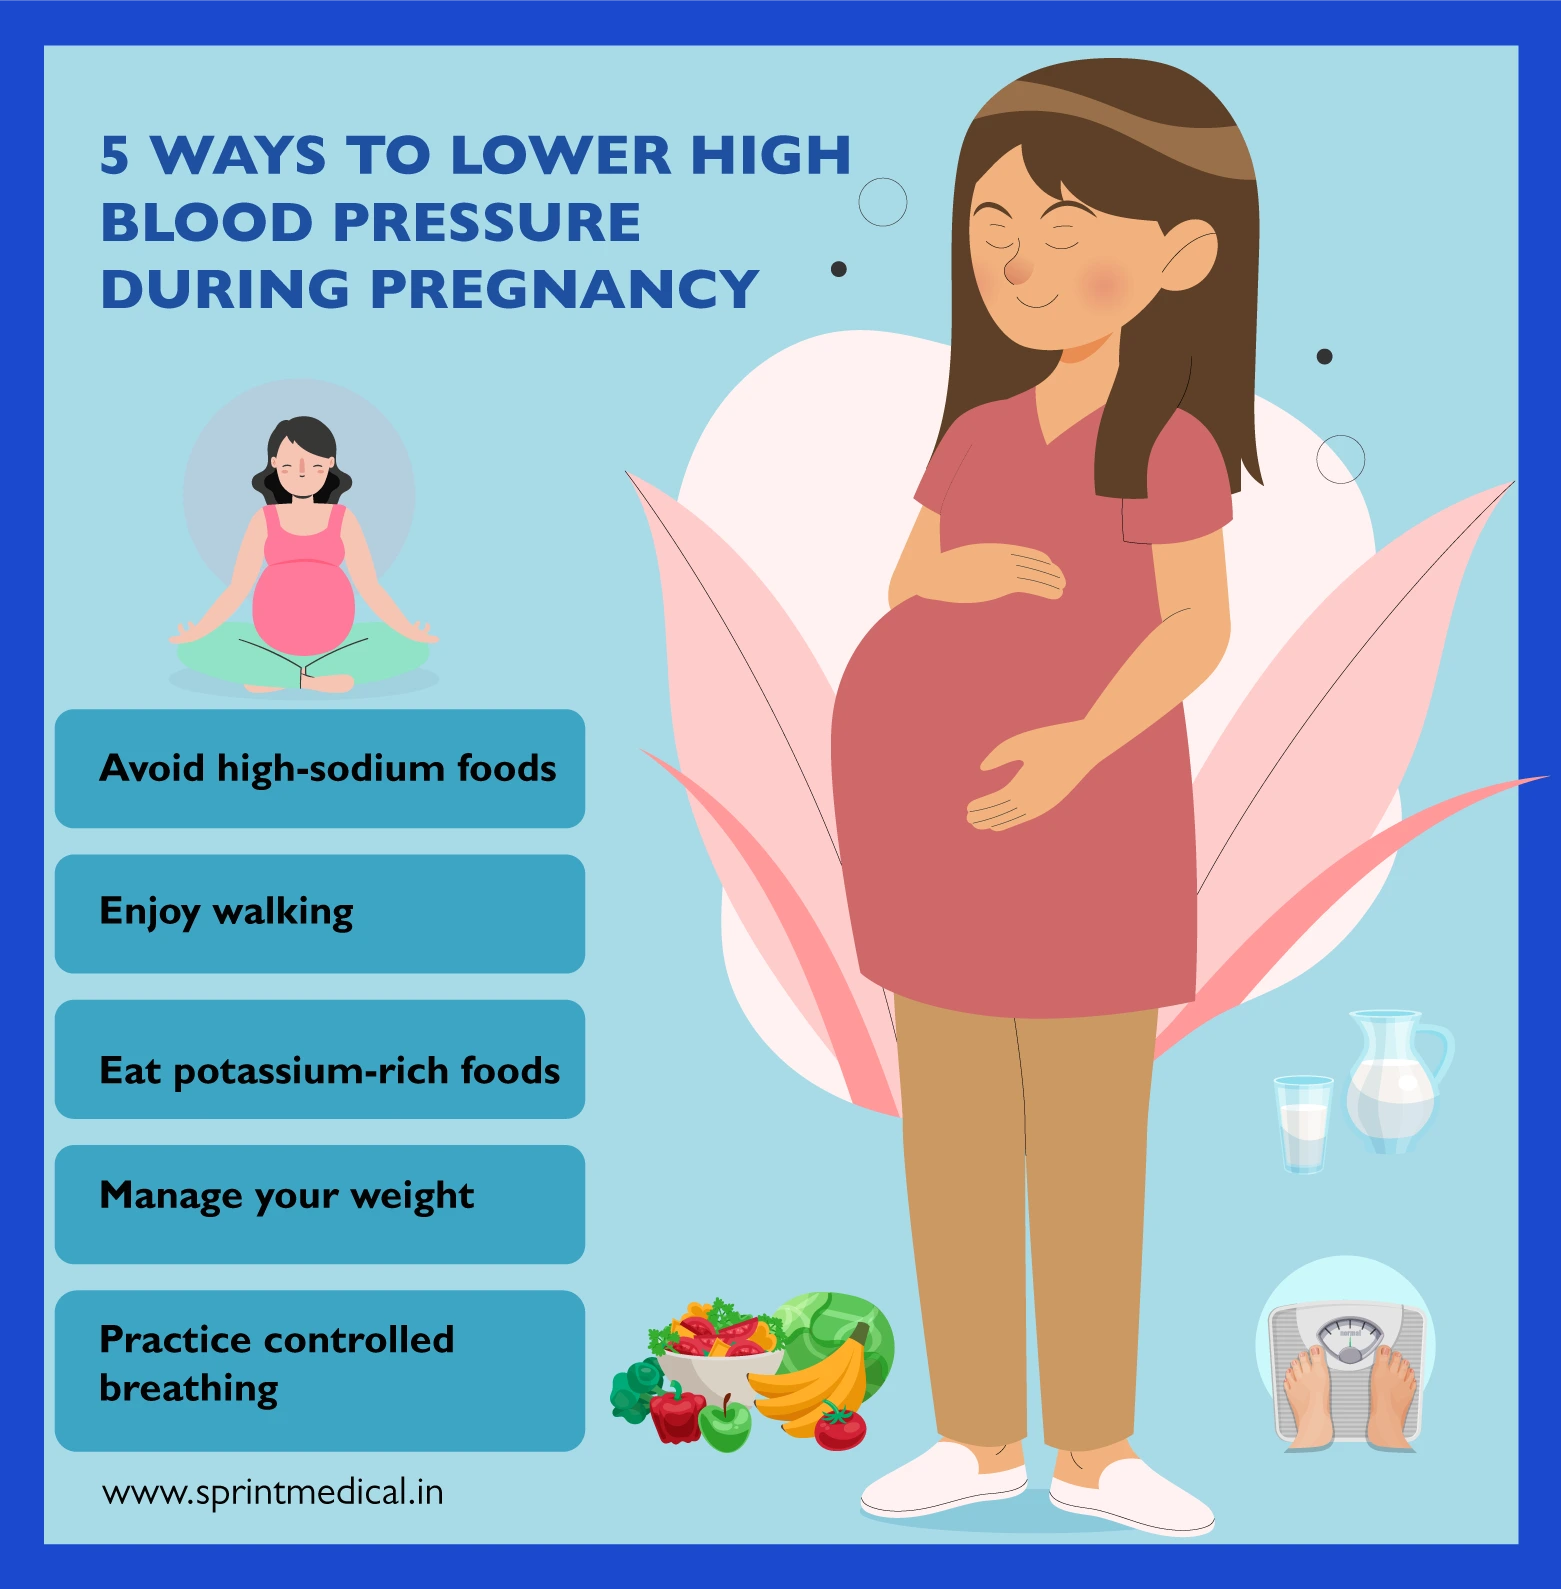 High Blood Pressure During Pregnancy: Symptoms and Prevention